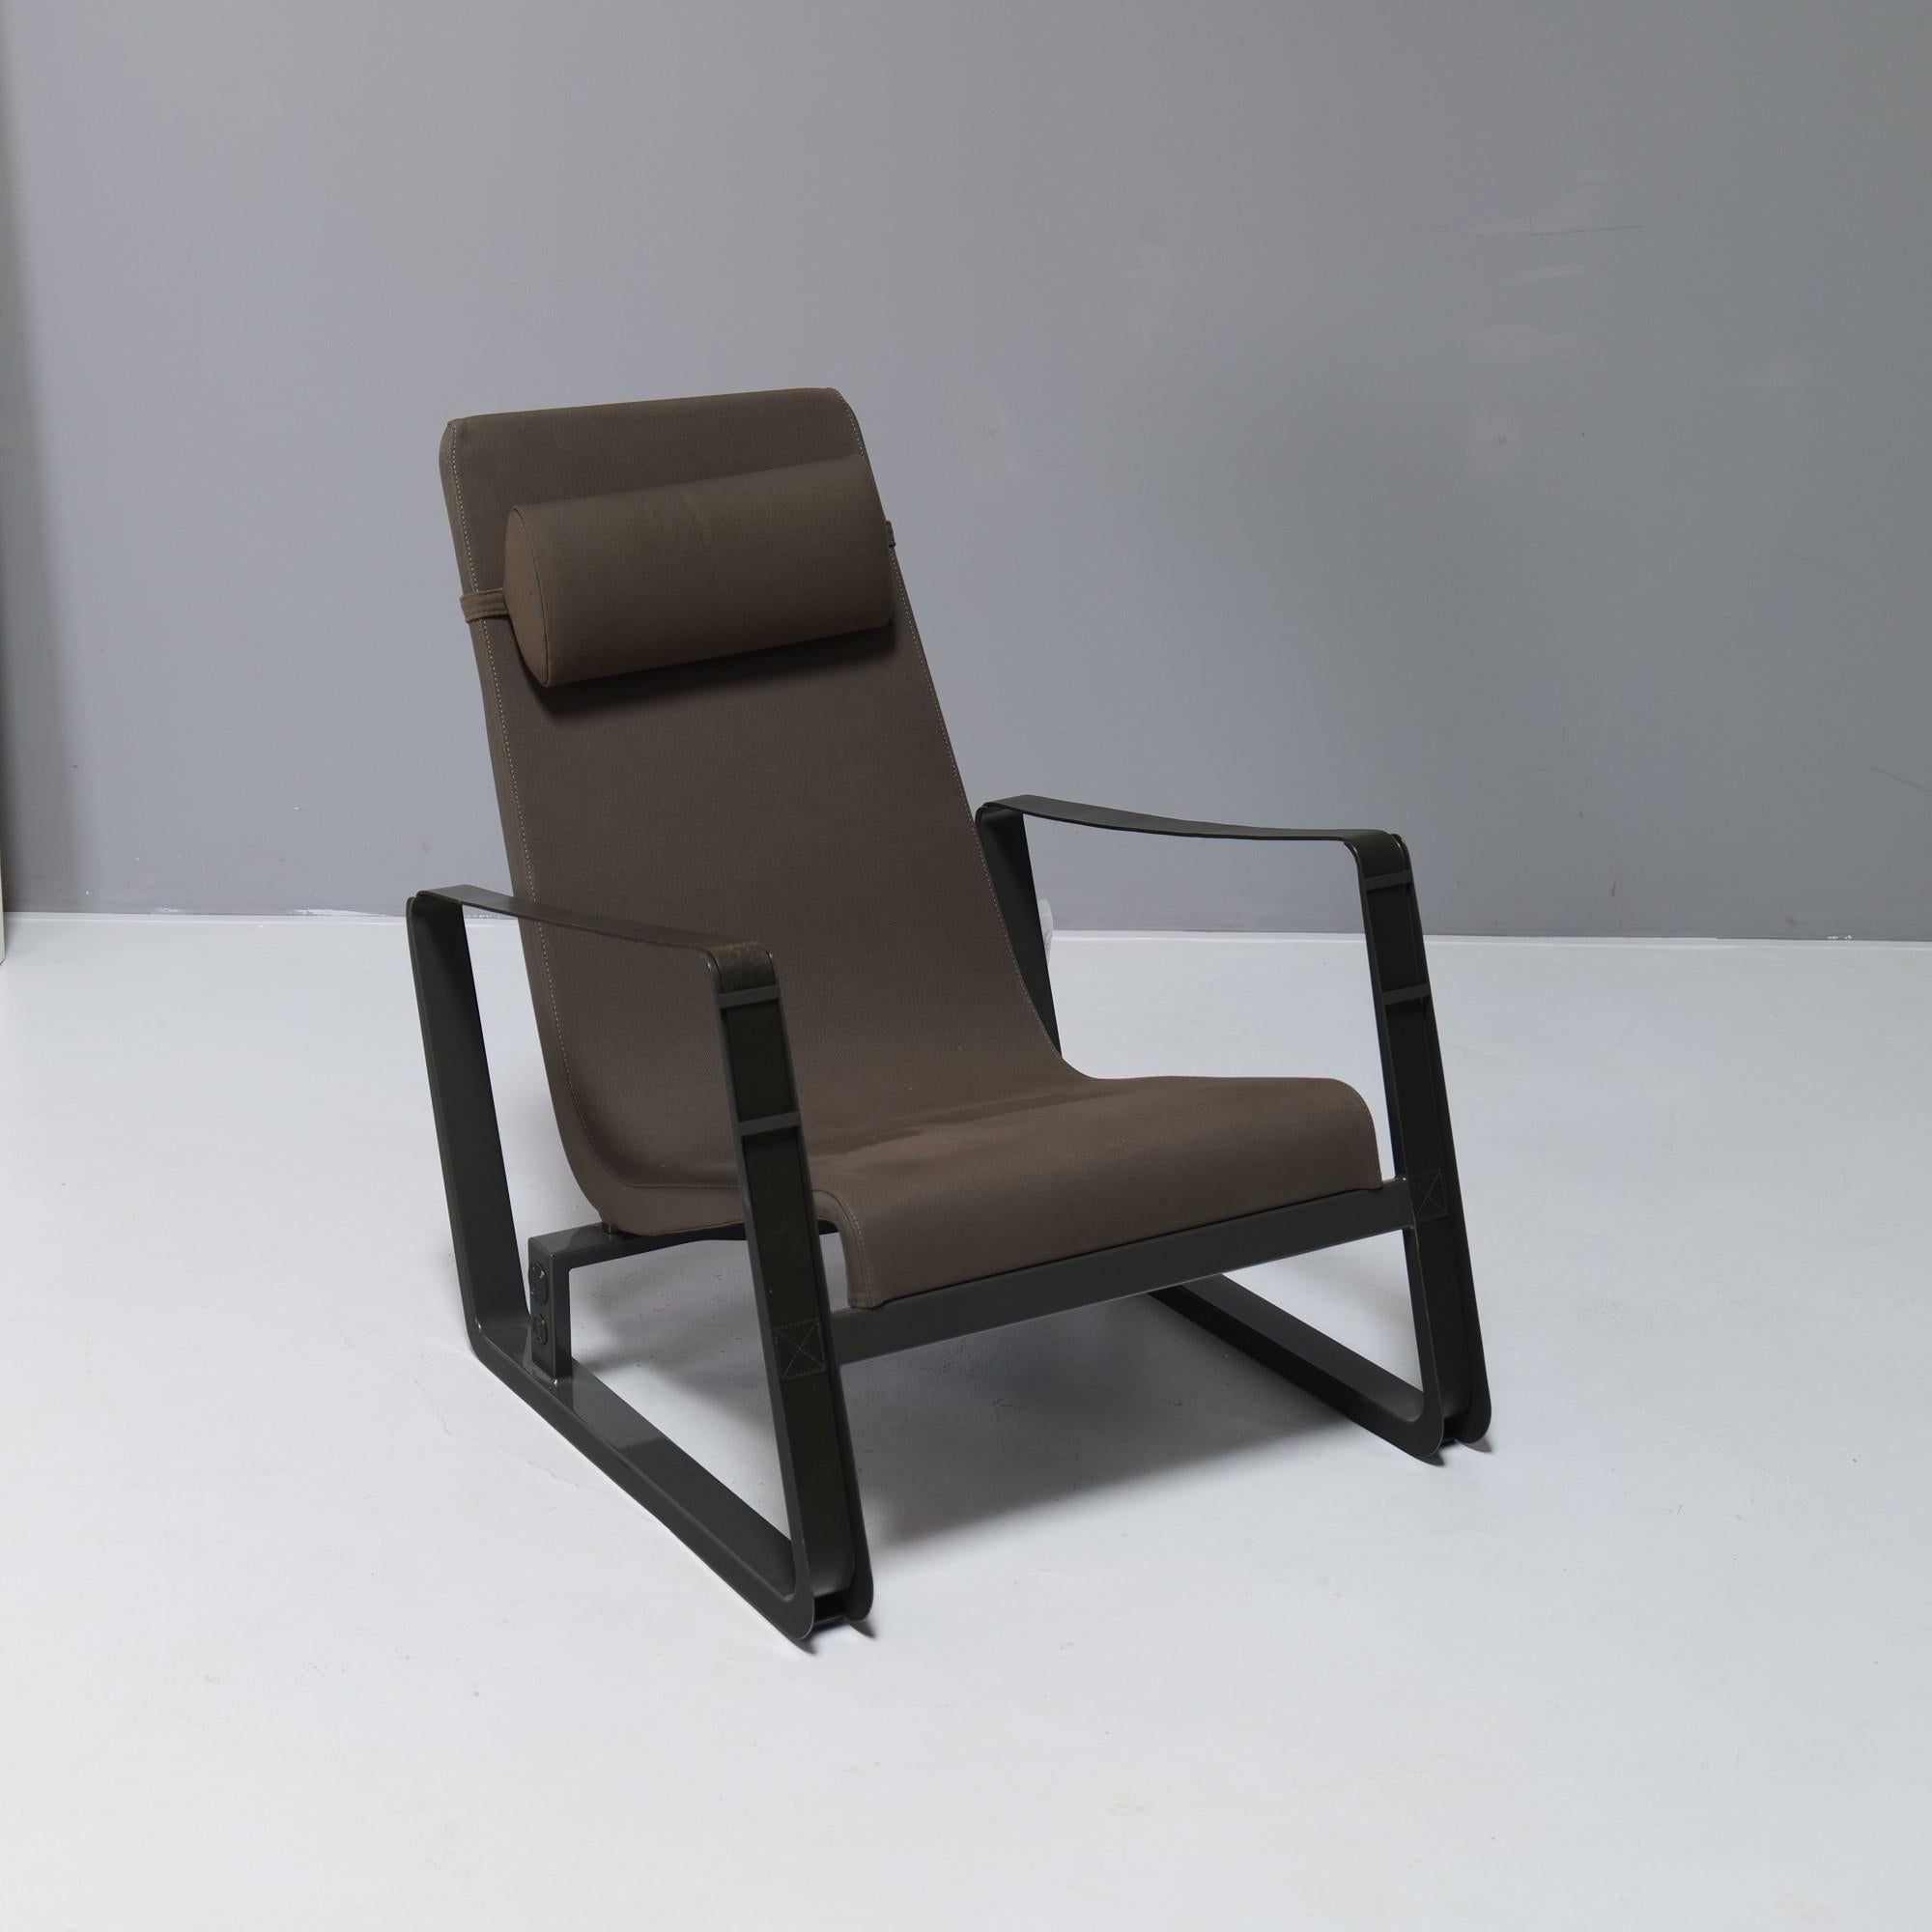 Rare limited edition Cité armchair by Jean Prouvé for Vitra x G-Star Raw.

This model is still with the original tags and is unused. This piece was only used for exhibitions.
Excellent condition with slight fading on the fabrics.

Made in 2011
